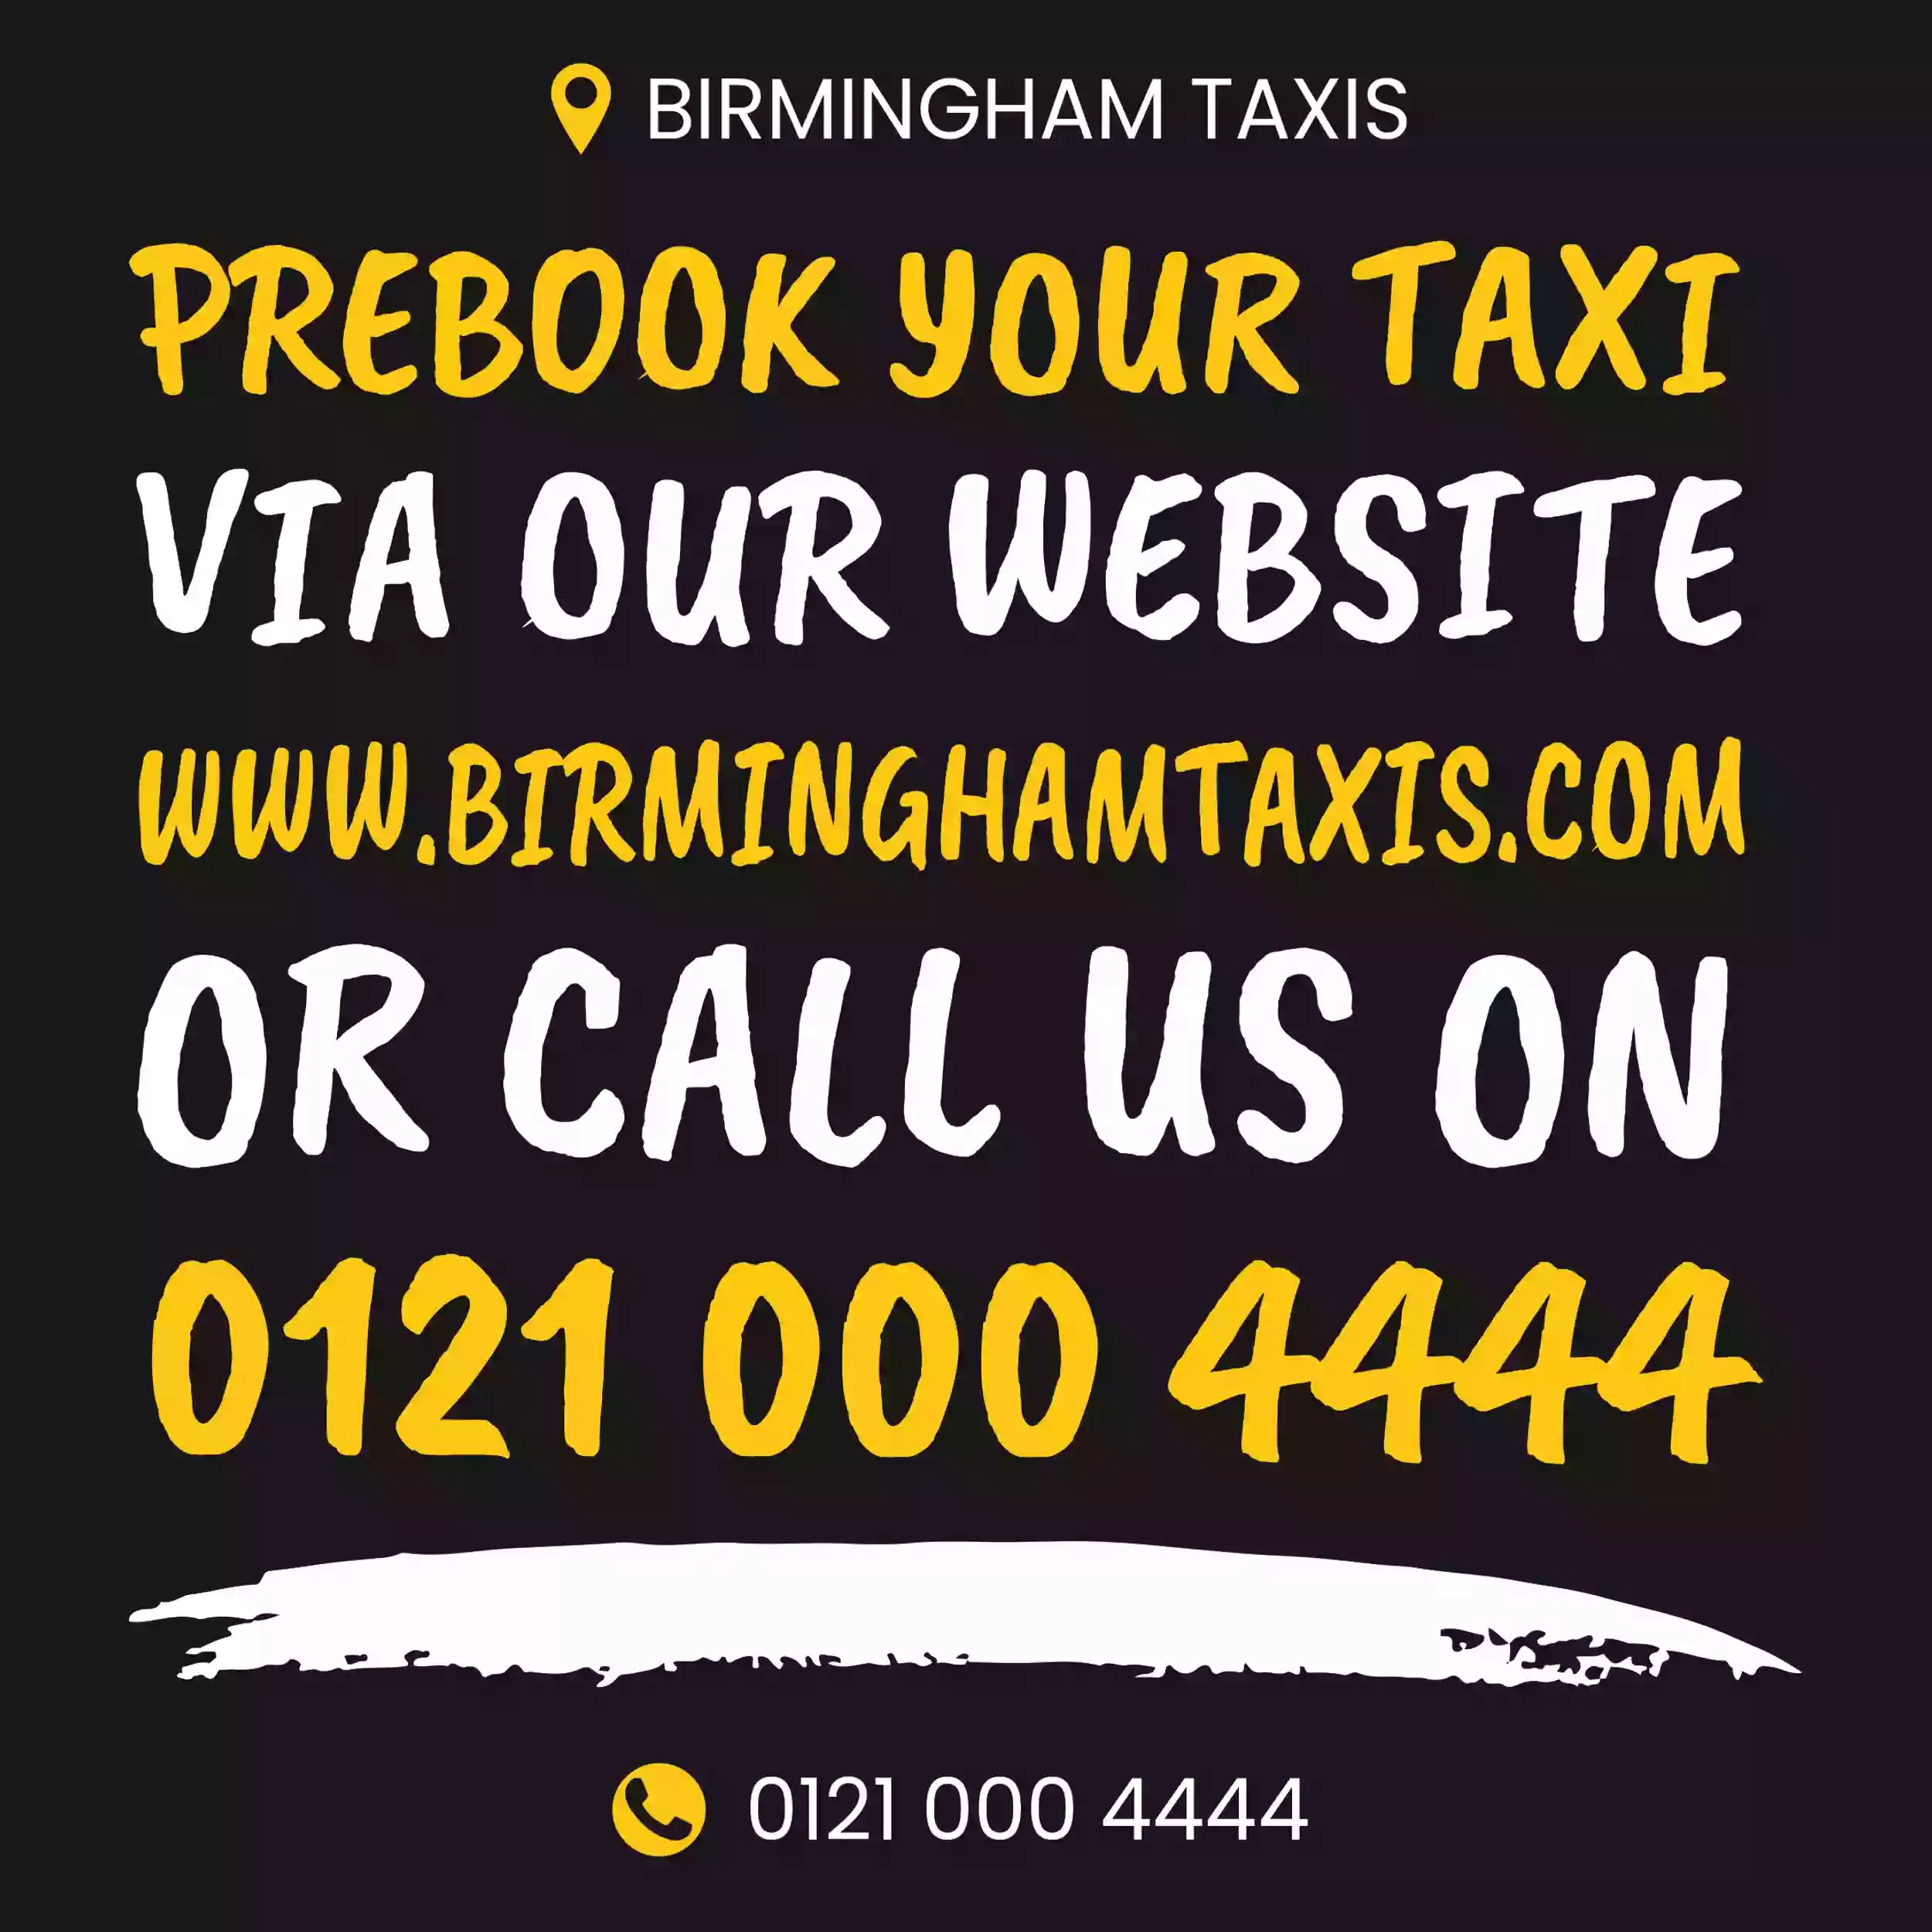 Kingstanding Taxis